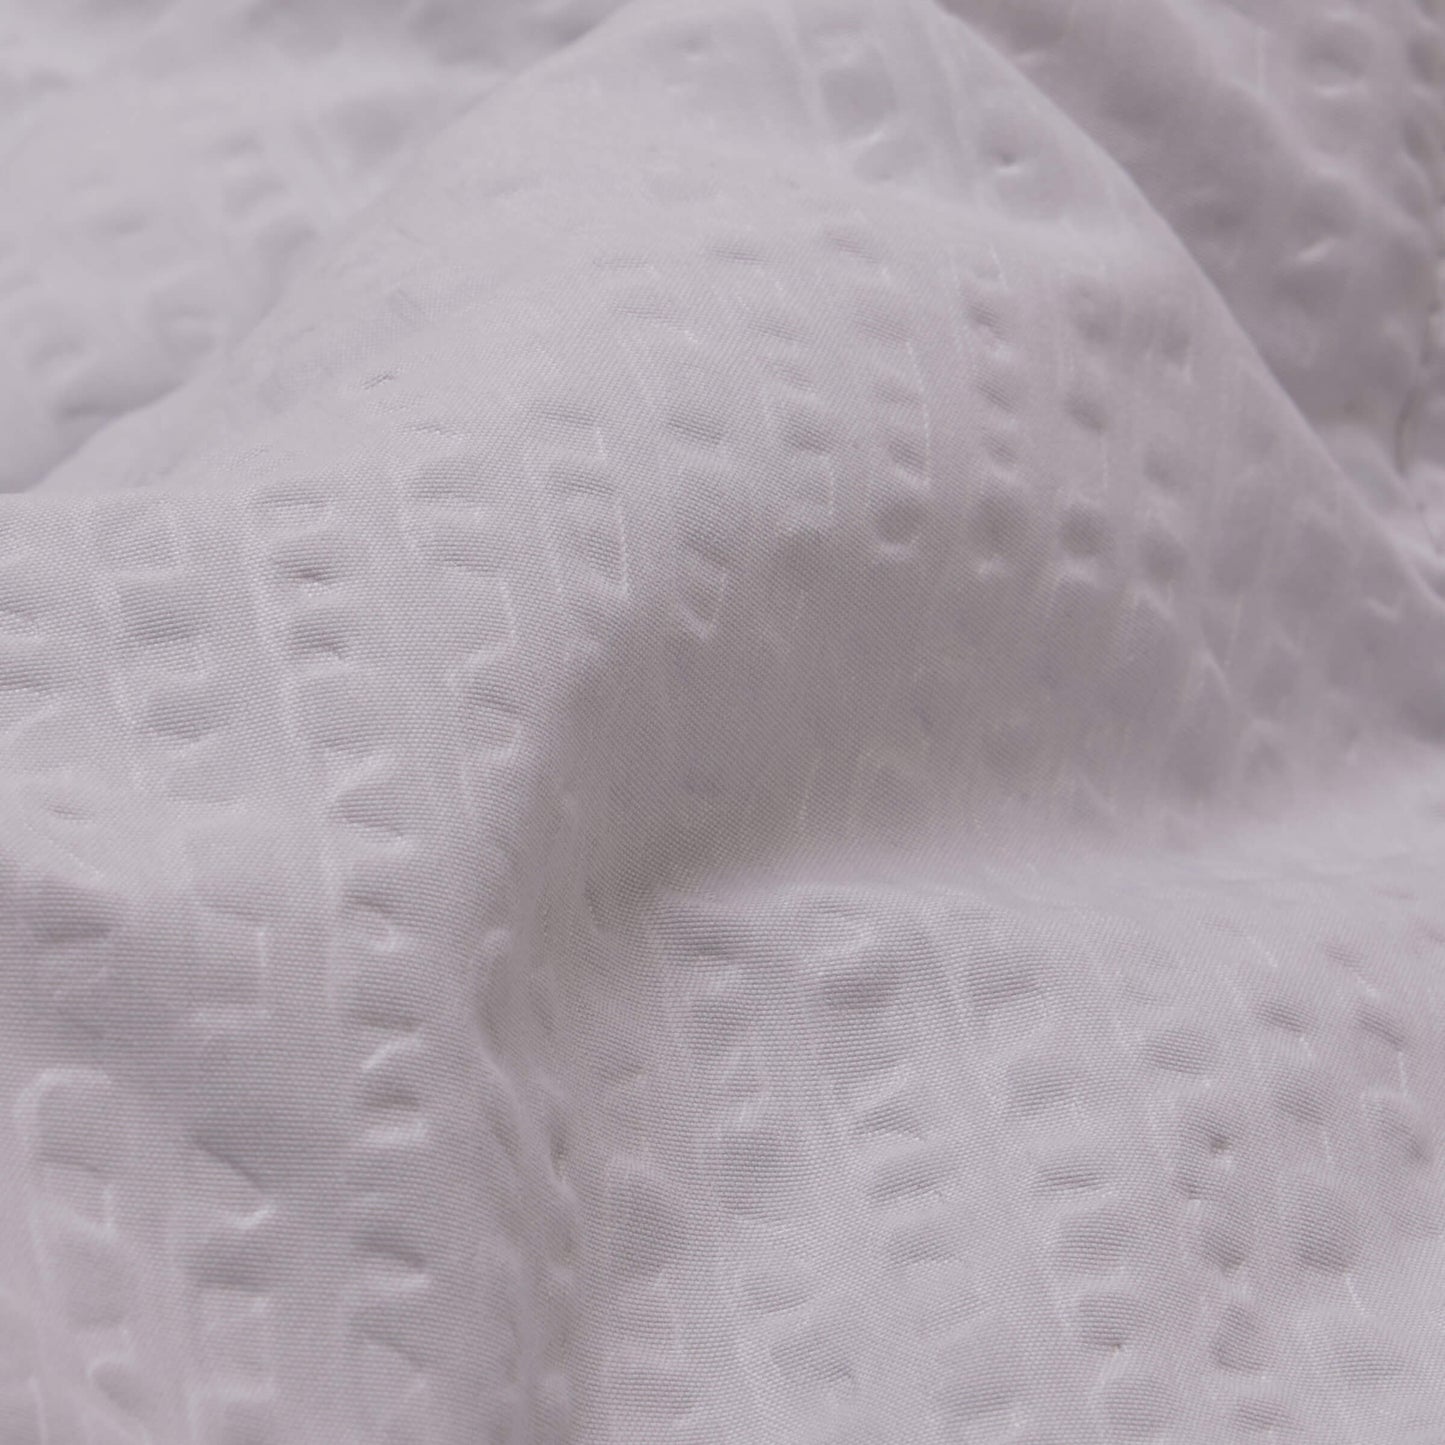 Detailed view of the Slumber Cloud Textured Blanket in pewter made with Outlast Temperature Regulation Technology